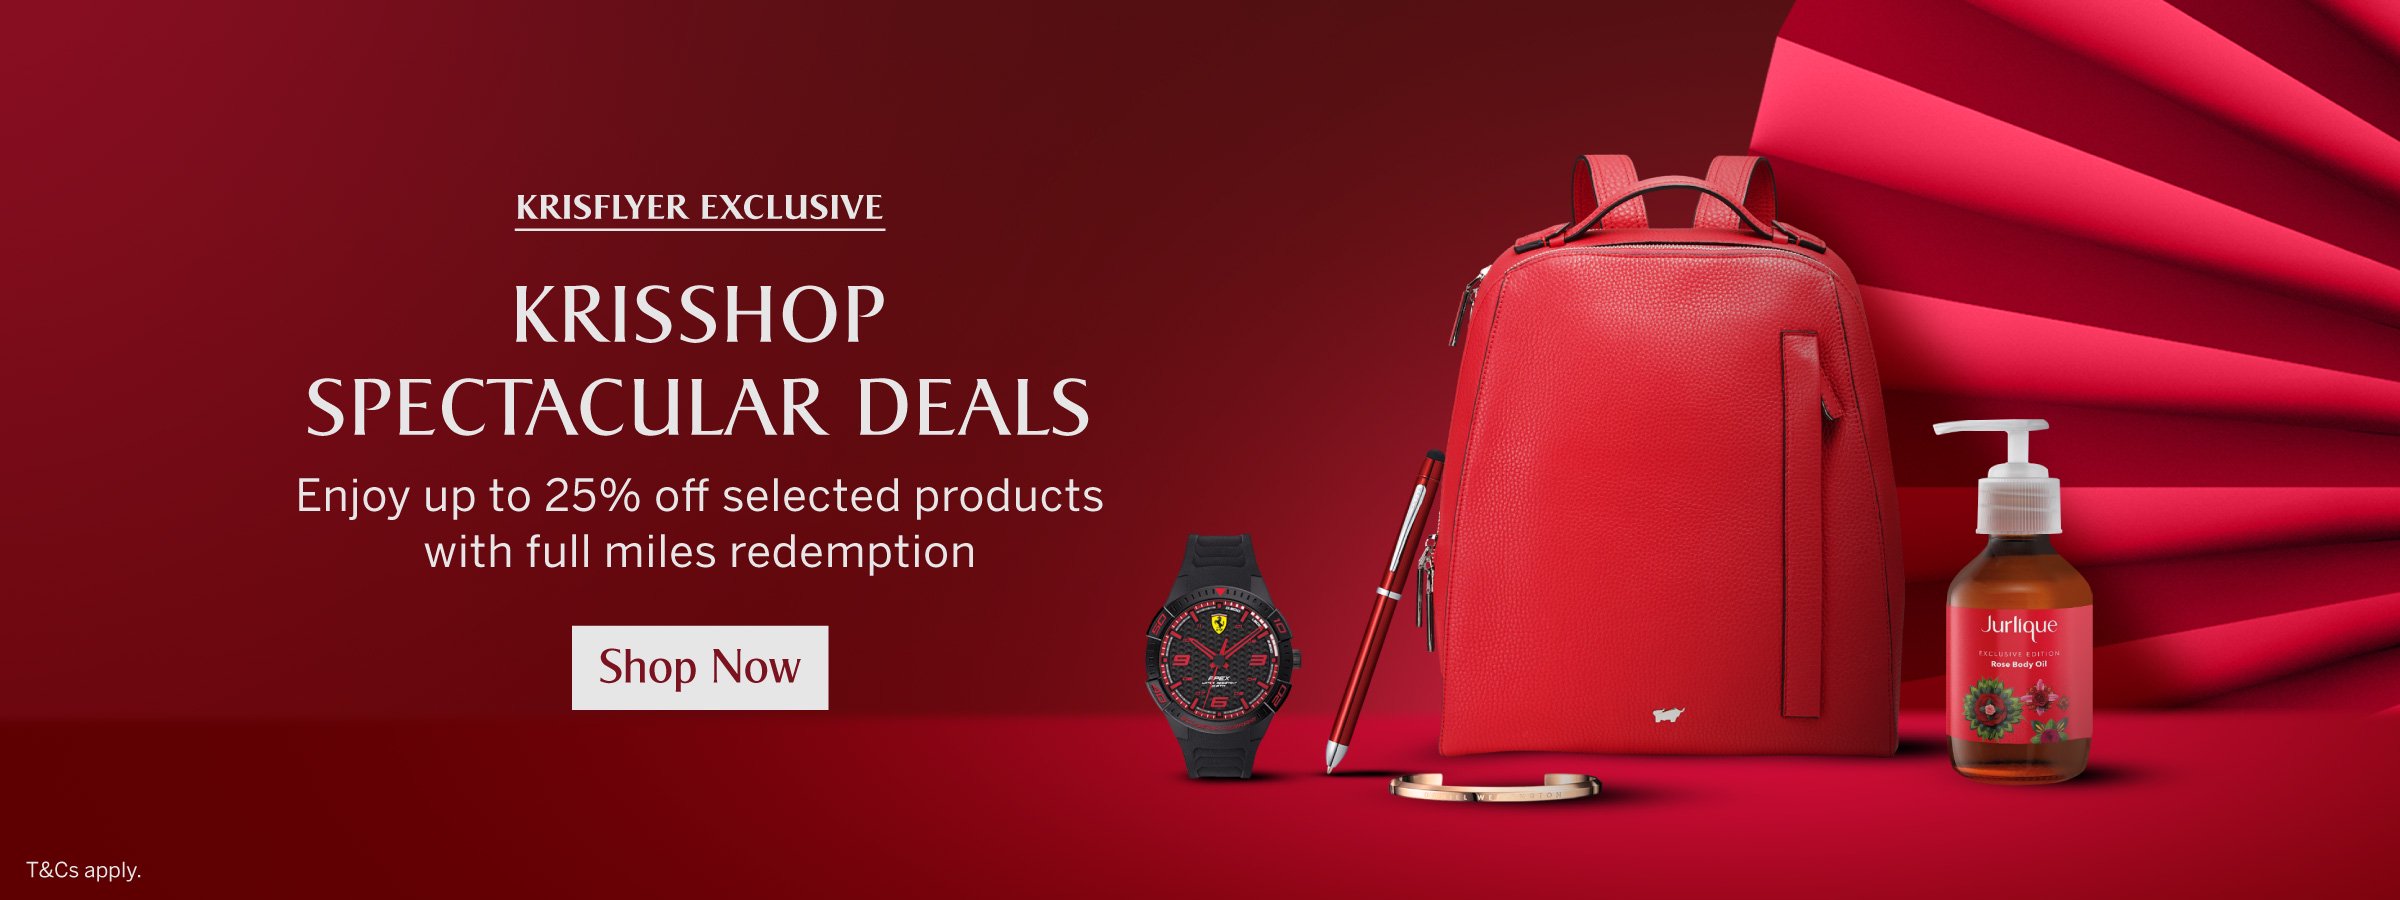 KrisShop Spectacular Deals, enjoy up to 25% off selected items with full miles redemption